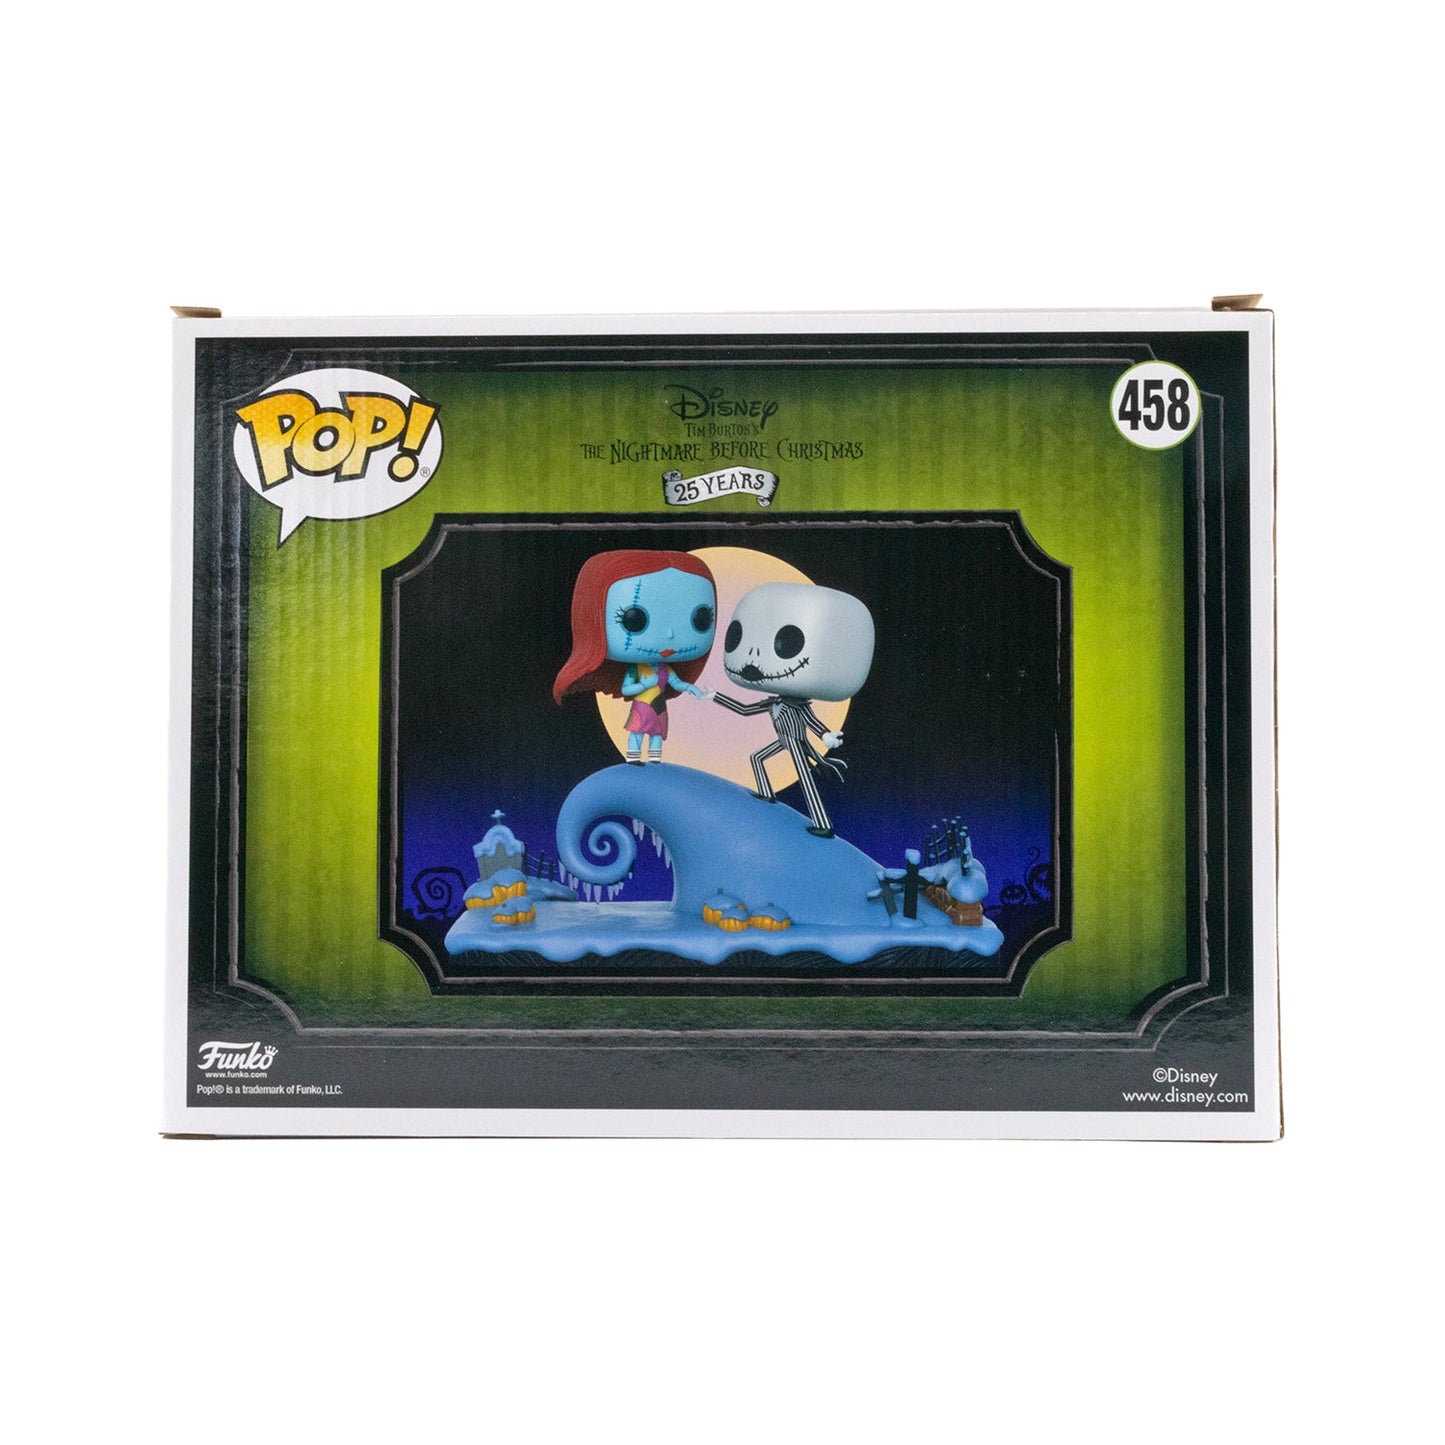 Funko Pop! The Nightmare Before Christmas Under the Moonlight Movie Moment #458